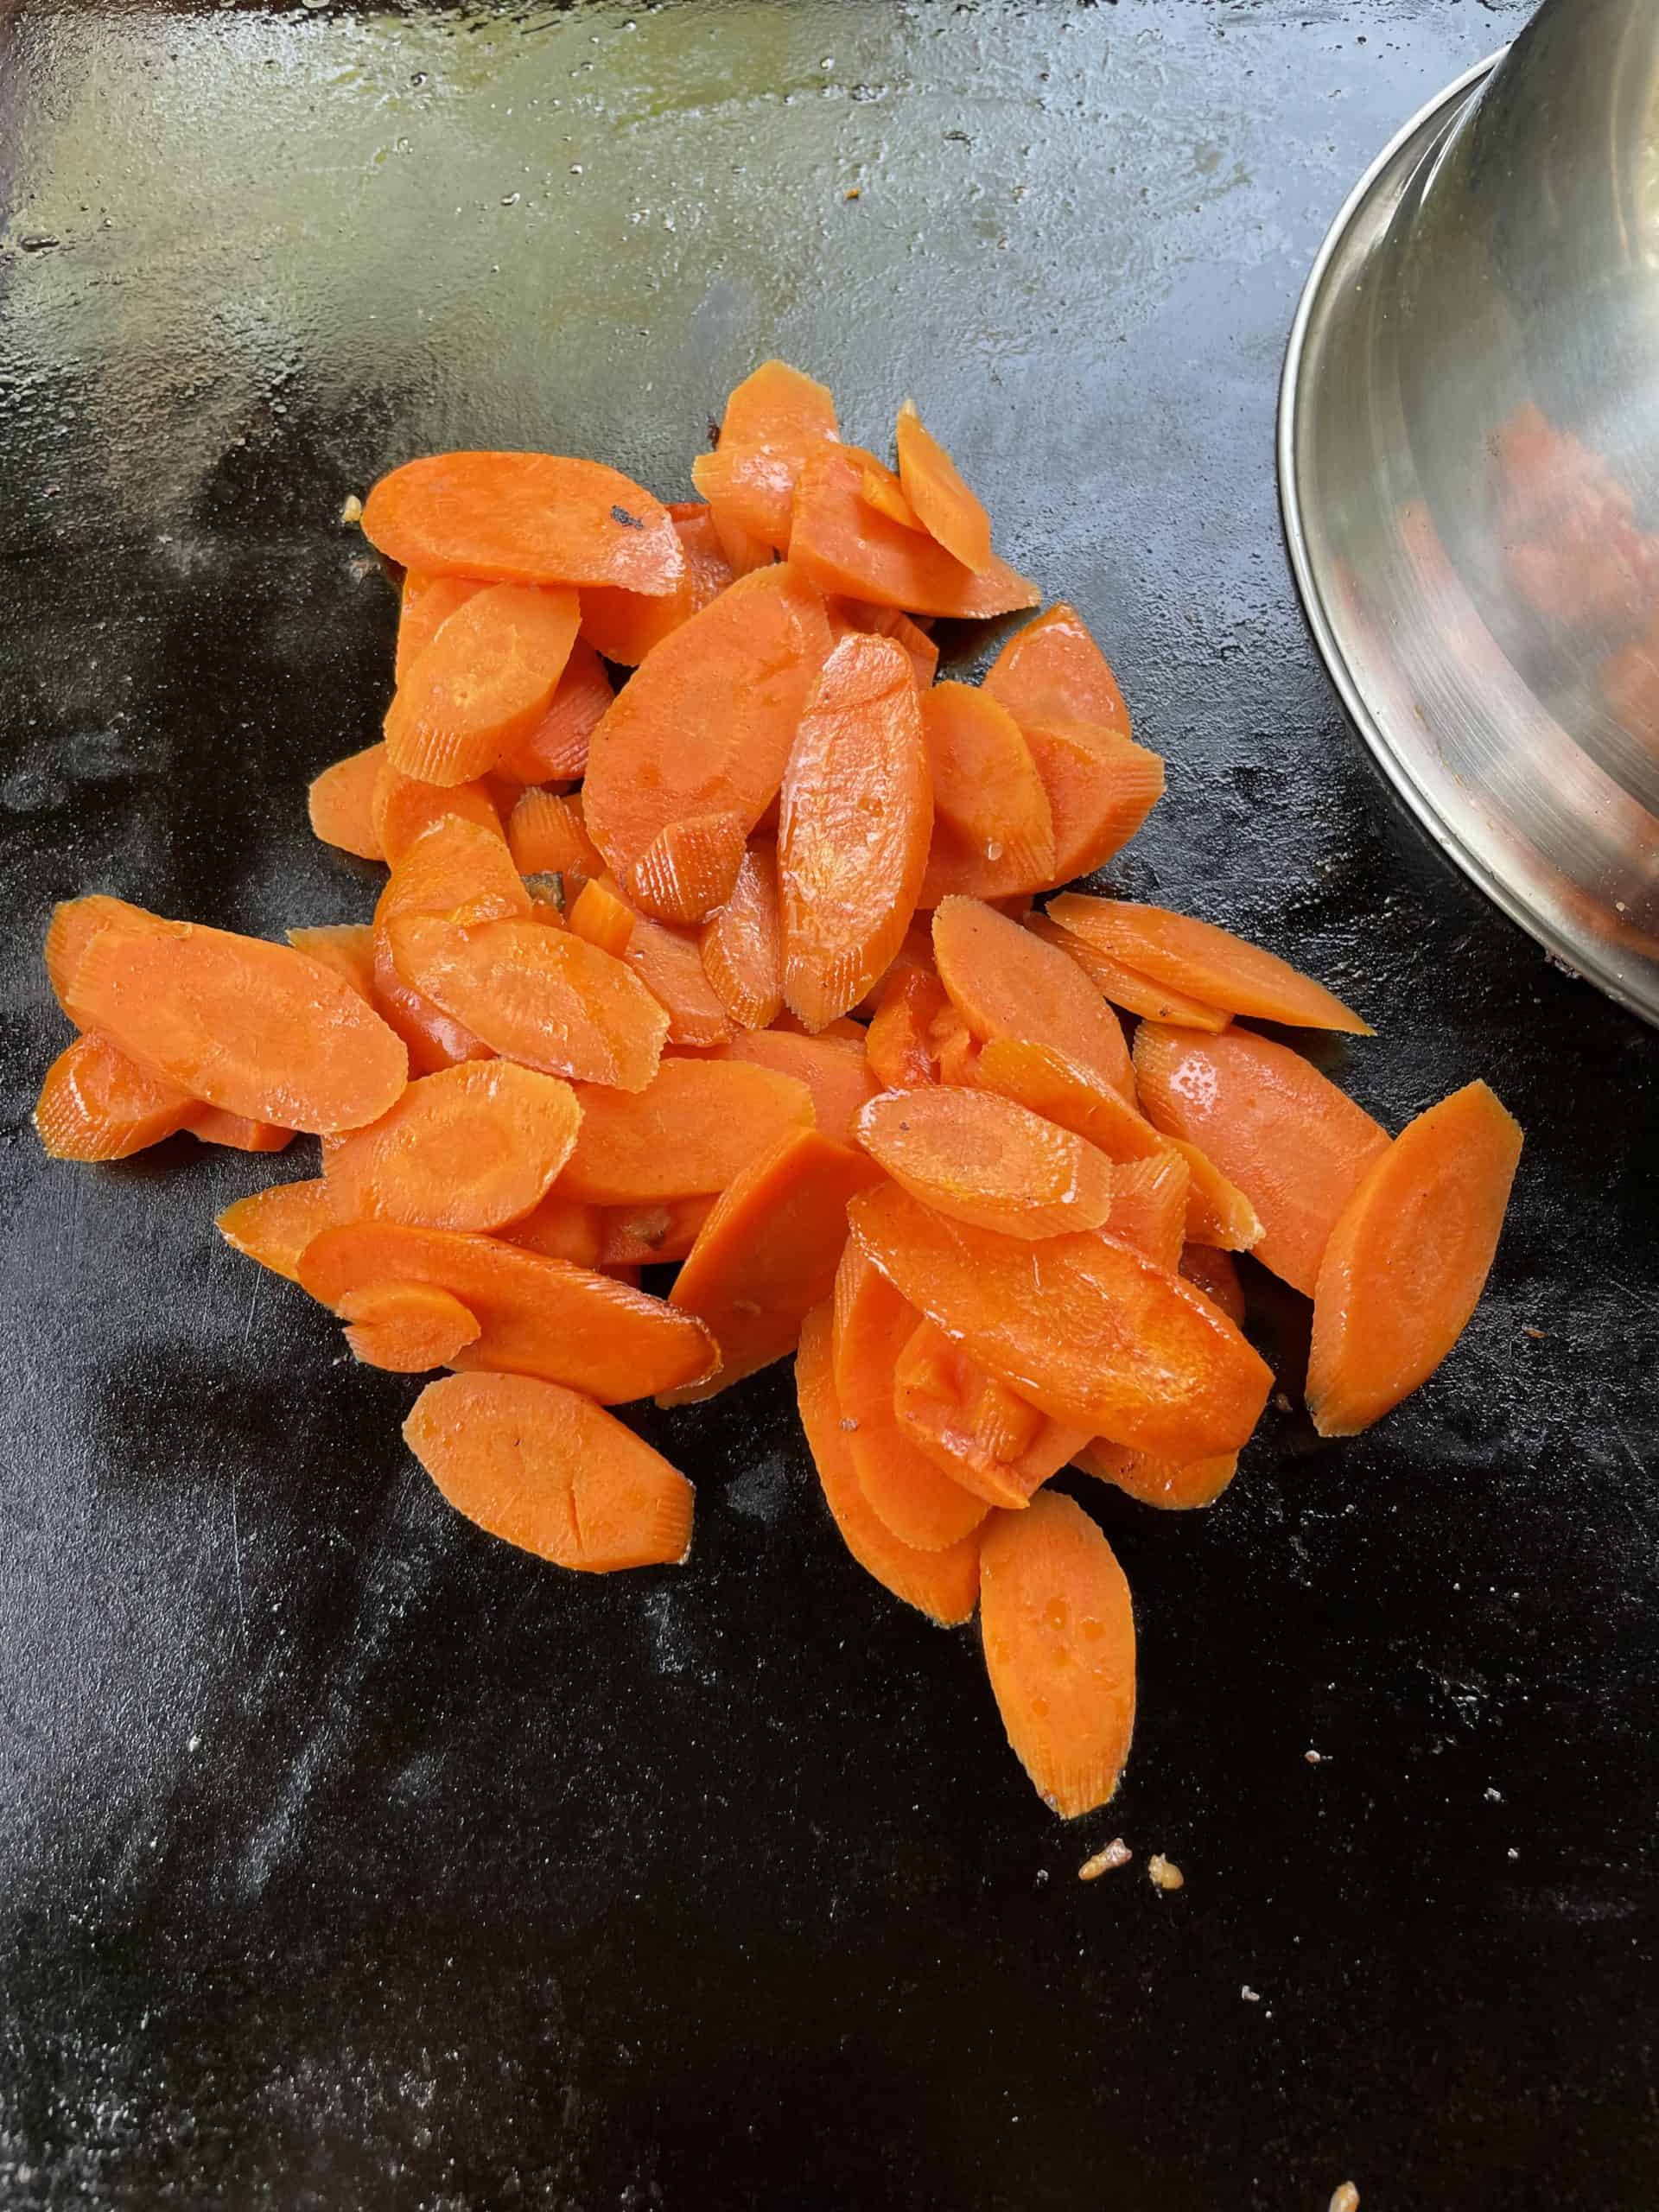 On a hot griddle, place the carrots and add some water.  Cover with a dome lid to steam and cook the carrots.